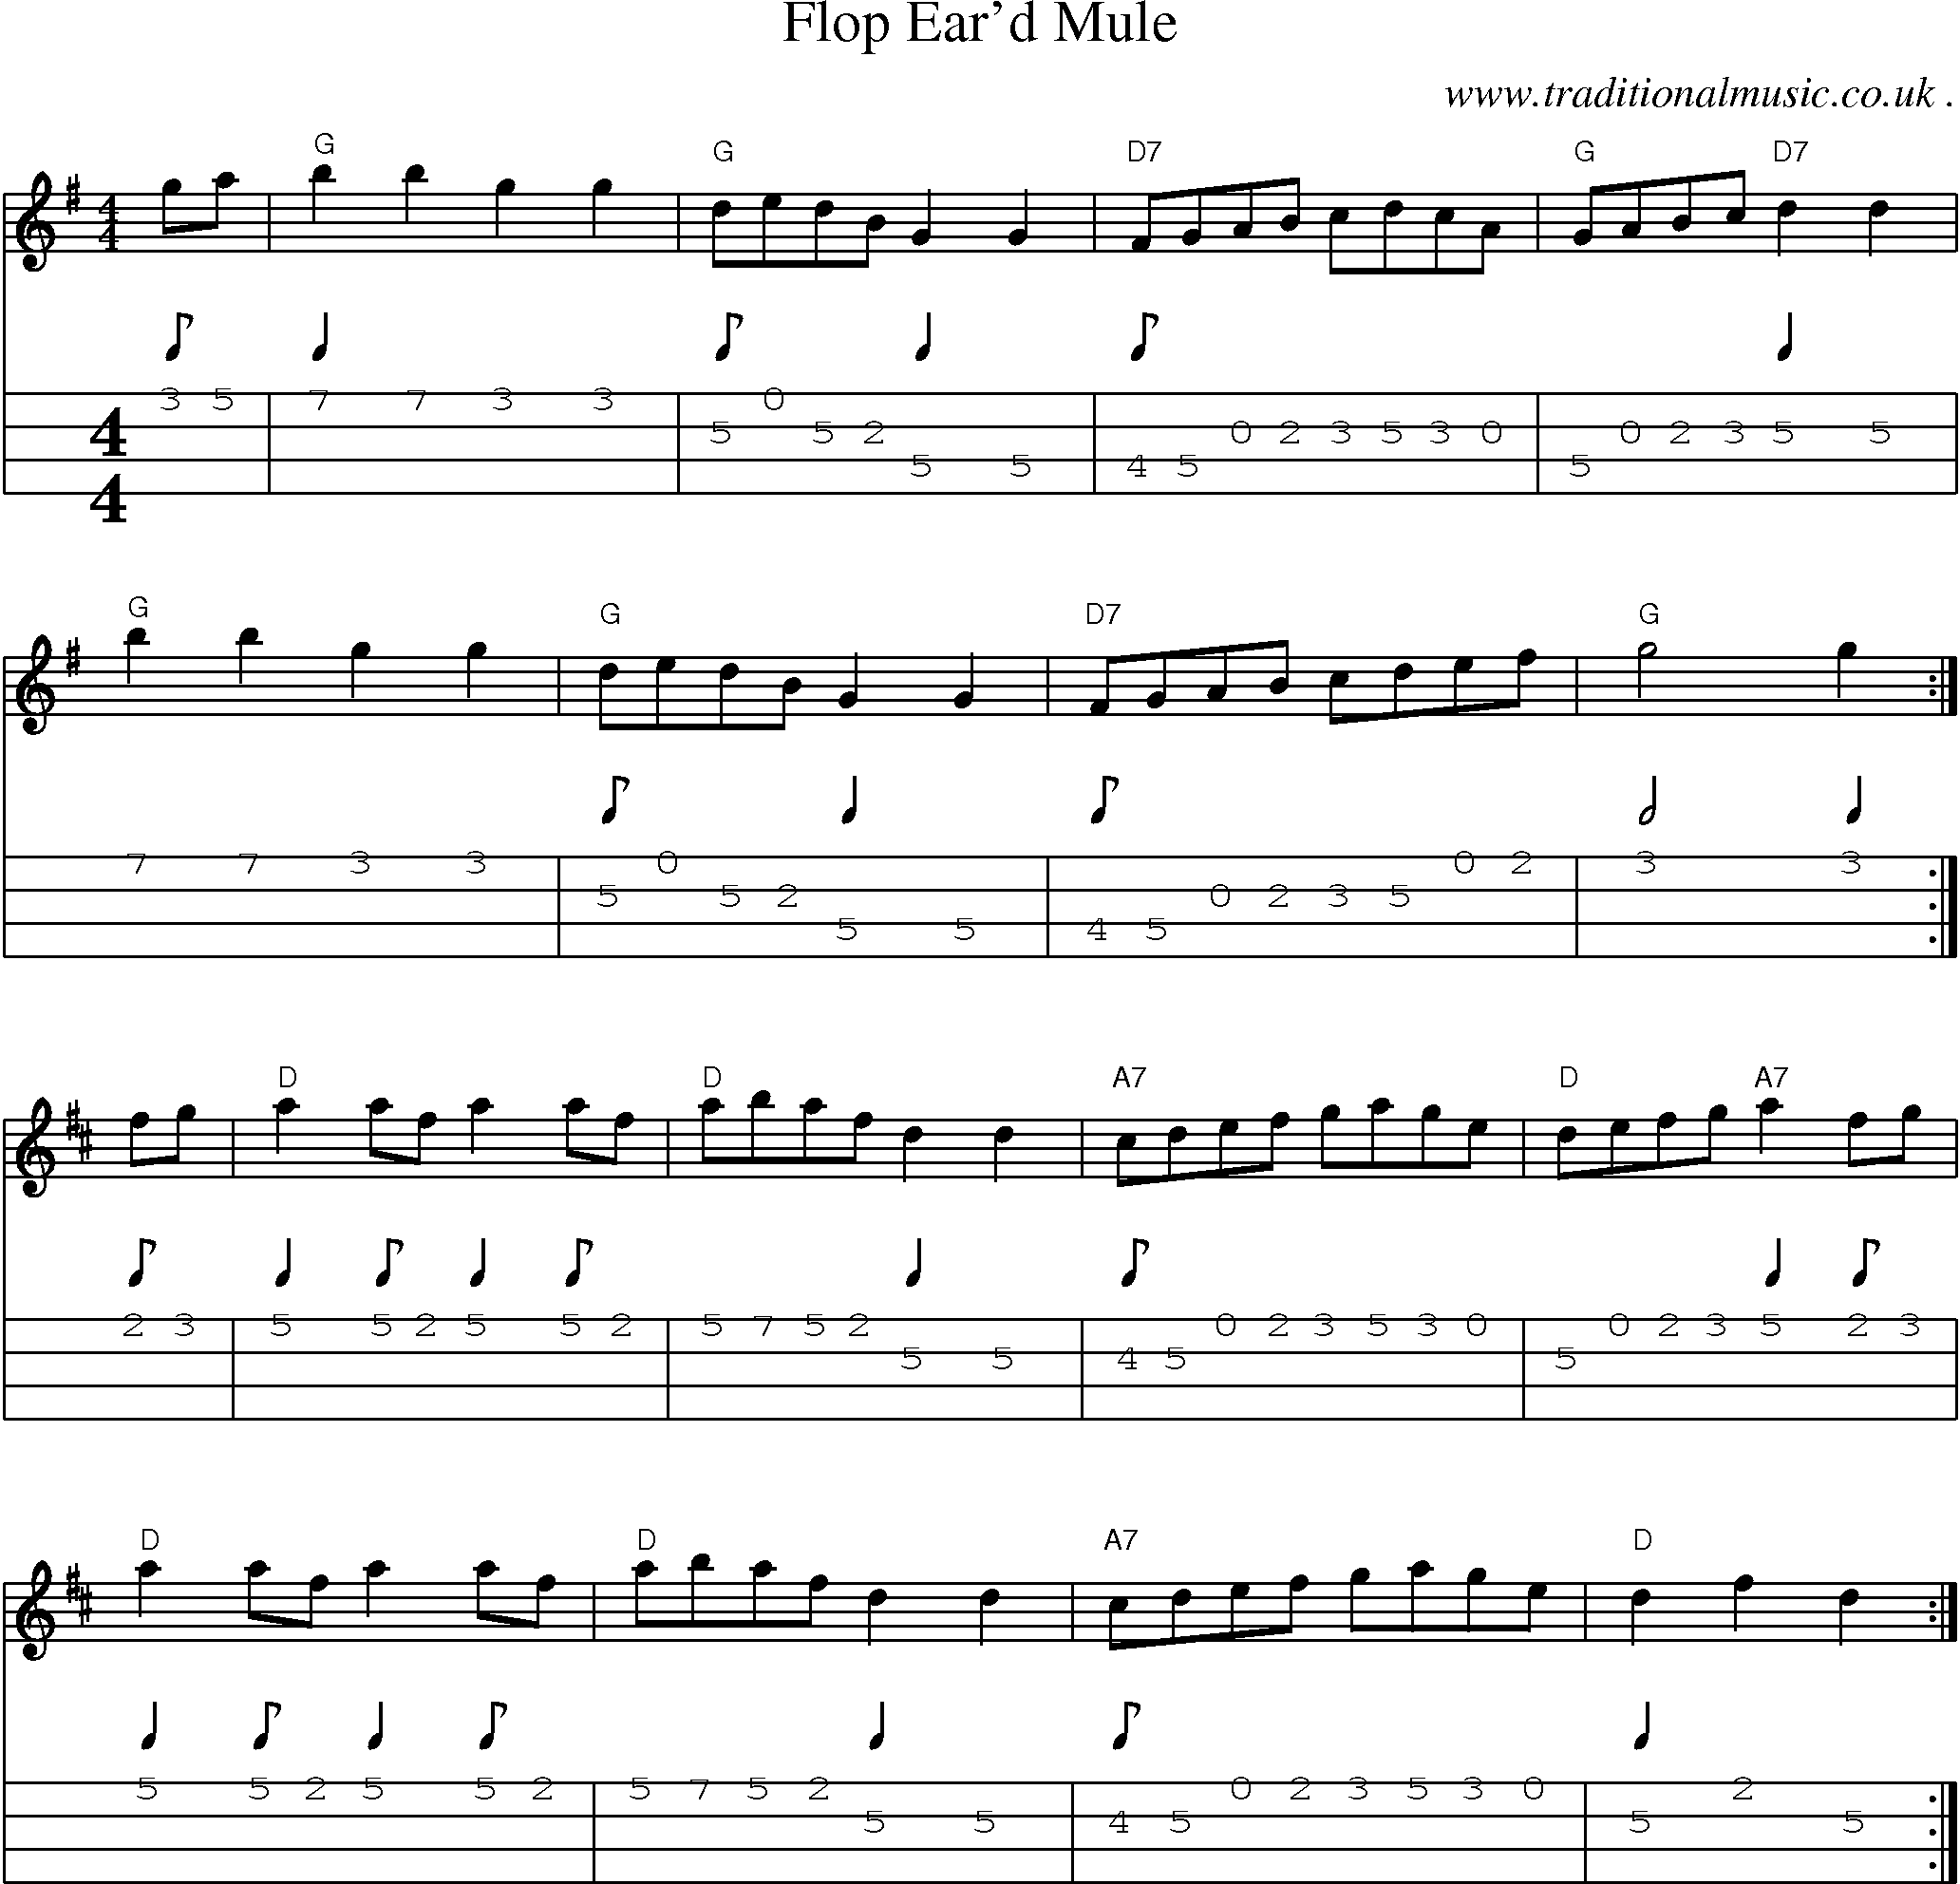 Music Score and Mandolin Tabs for Flop Eard Mule